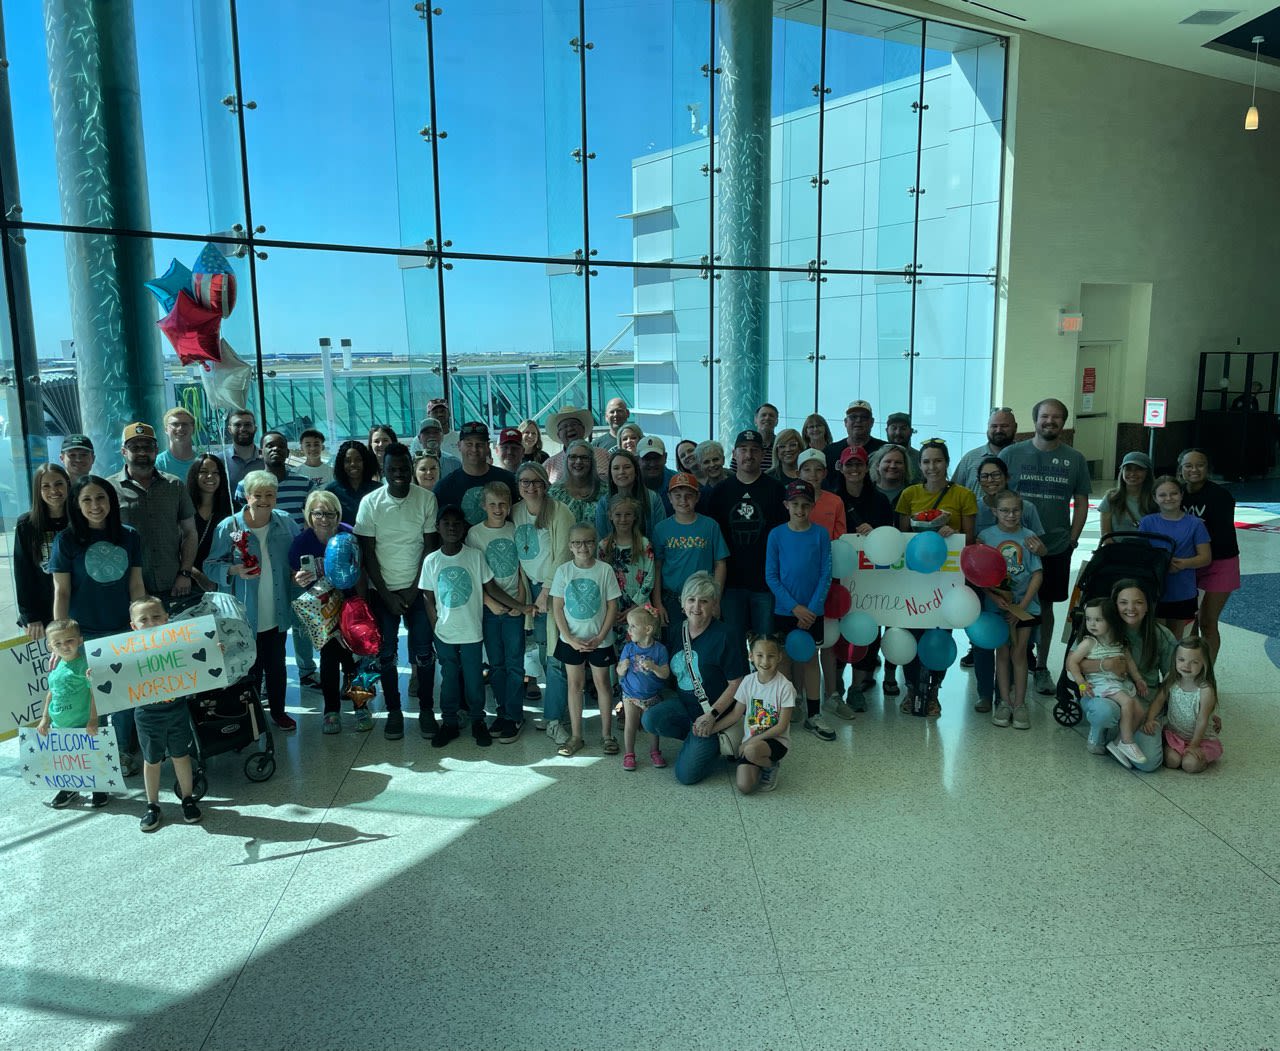 Snelgrooes family welcomes home their son Nordly